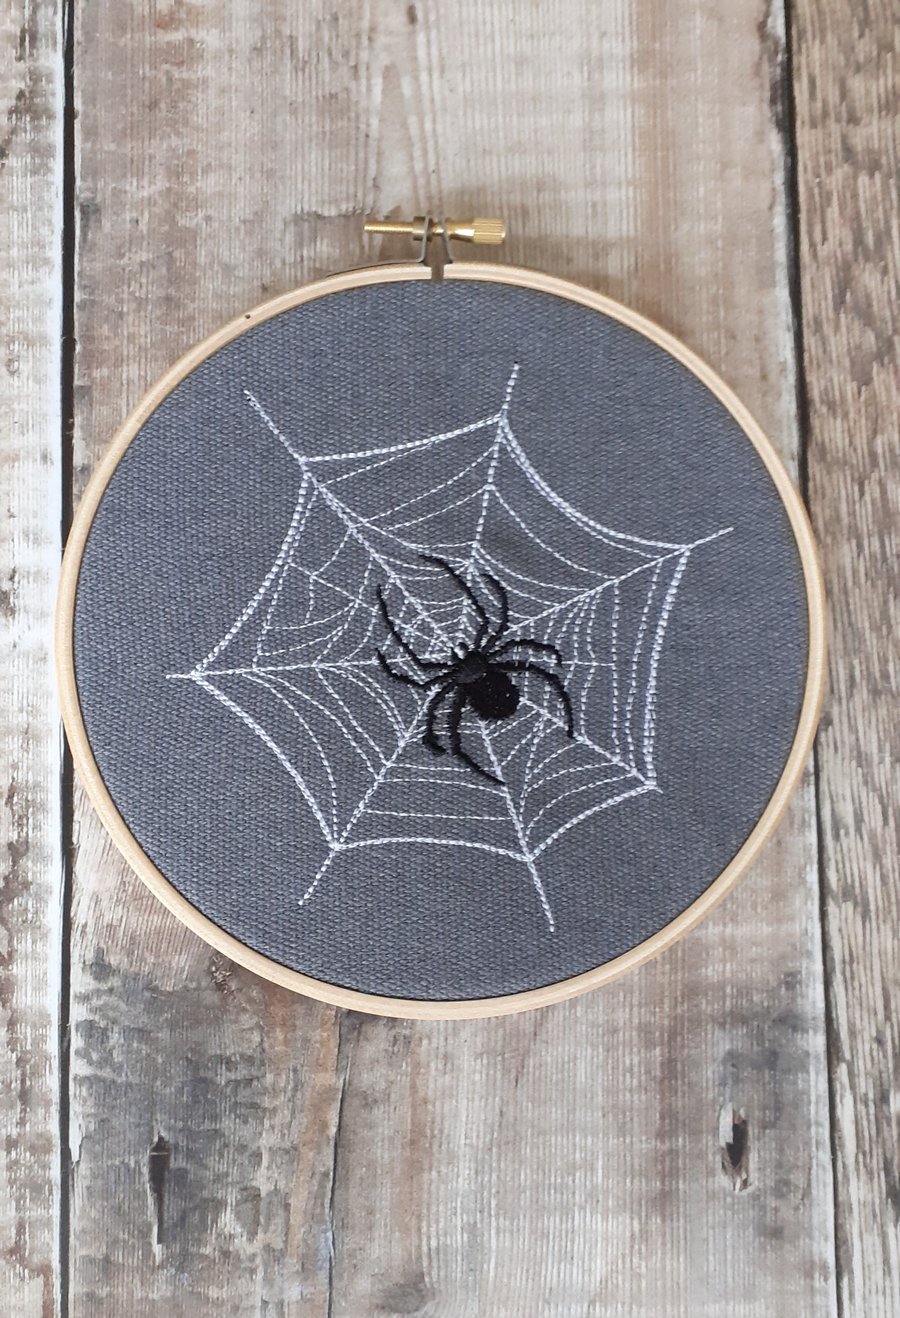 Spider web embroidery hoop